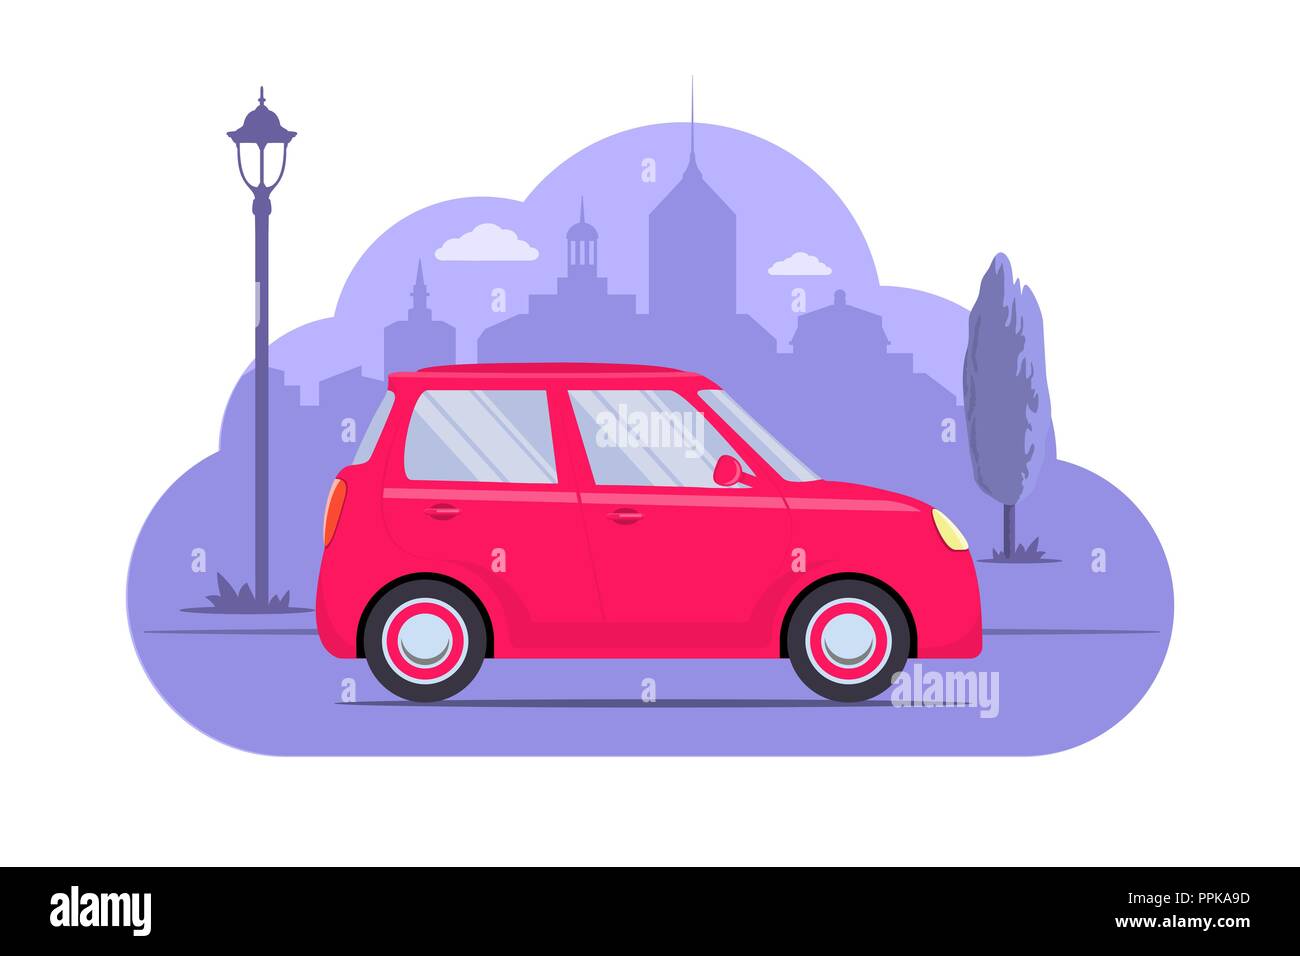 Cute car on city silhouette background. Pink car on purple monochrome background. Car concept illustration for app or website. Modern transport. Flat  Stock Vector